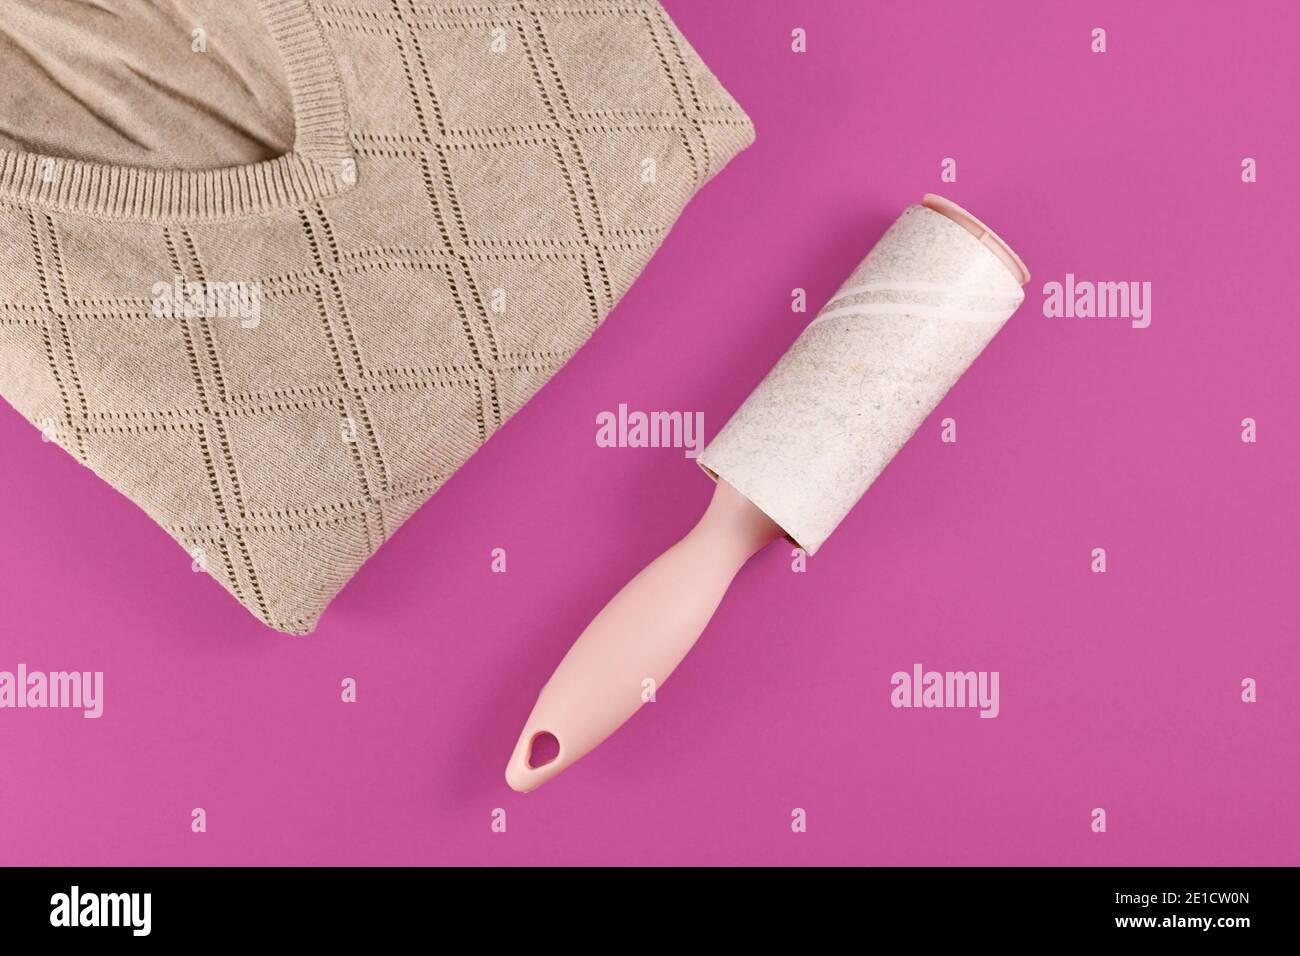 Used fluff roller next to folded sweater on dark pink background Stock Photo